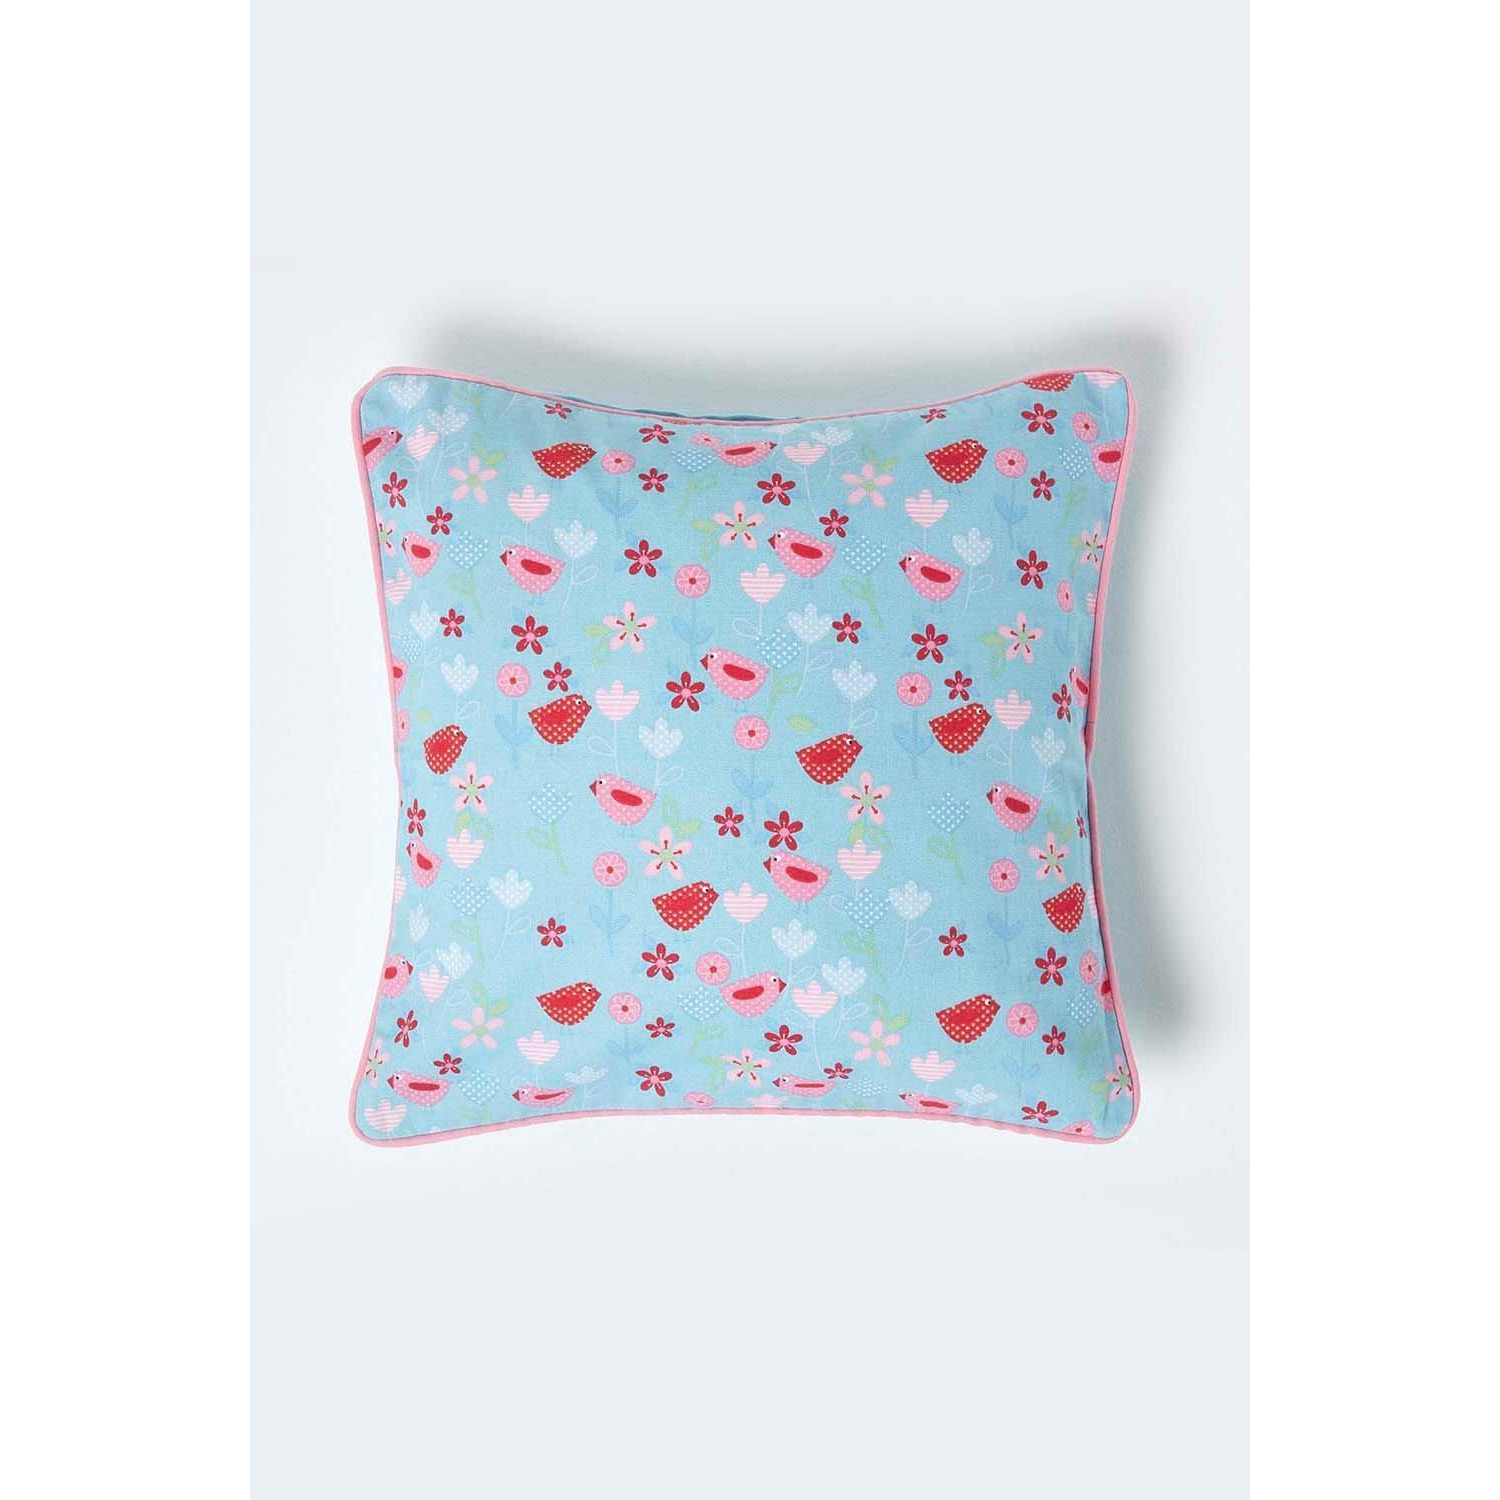 Cotton Birds and Flower Cushion Cover - image 1